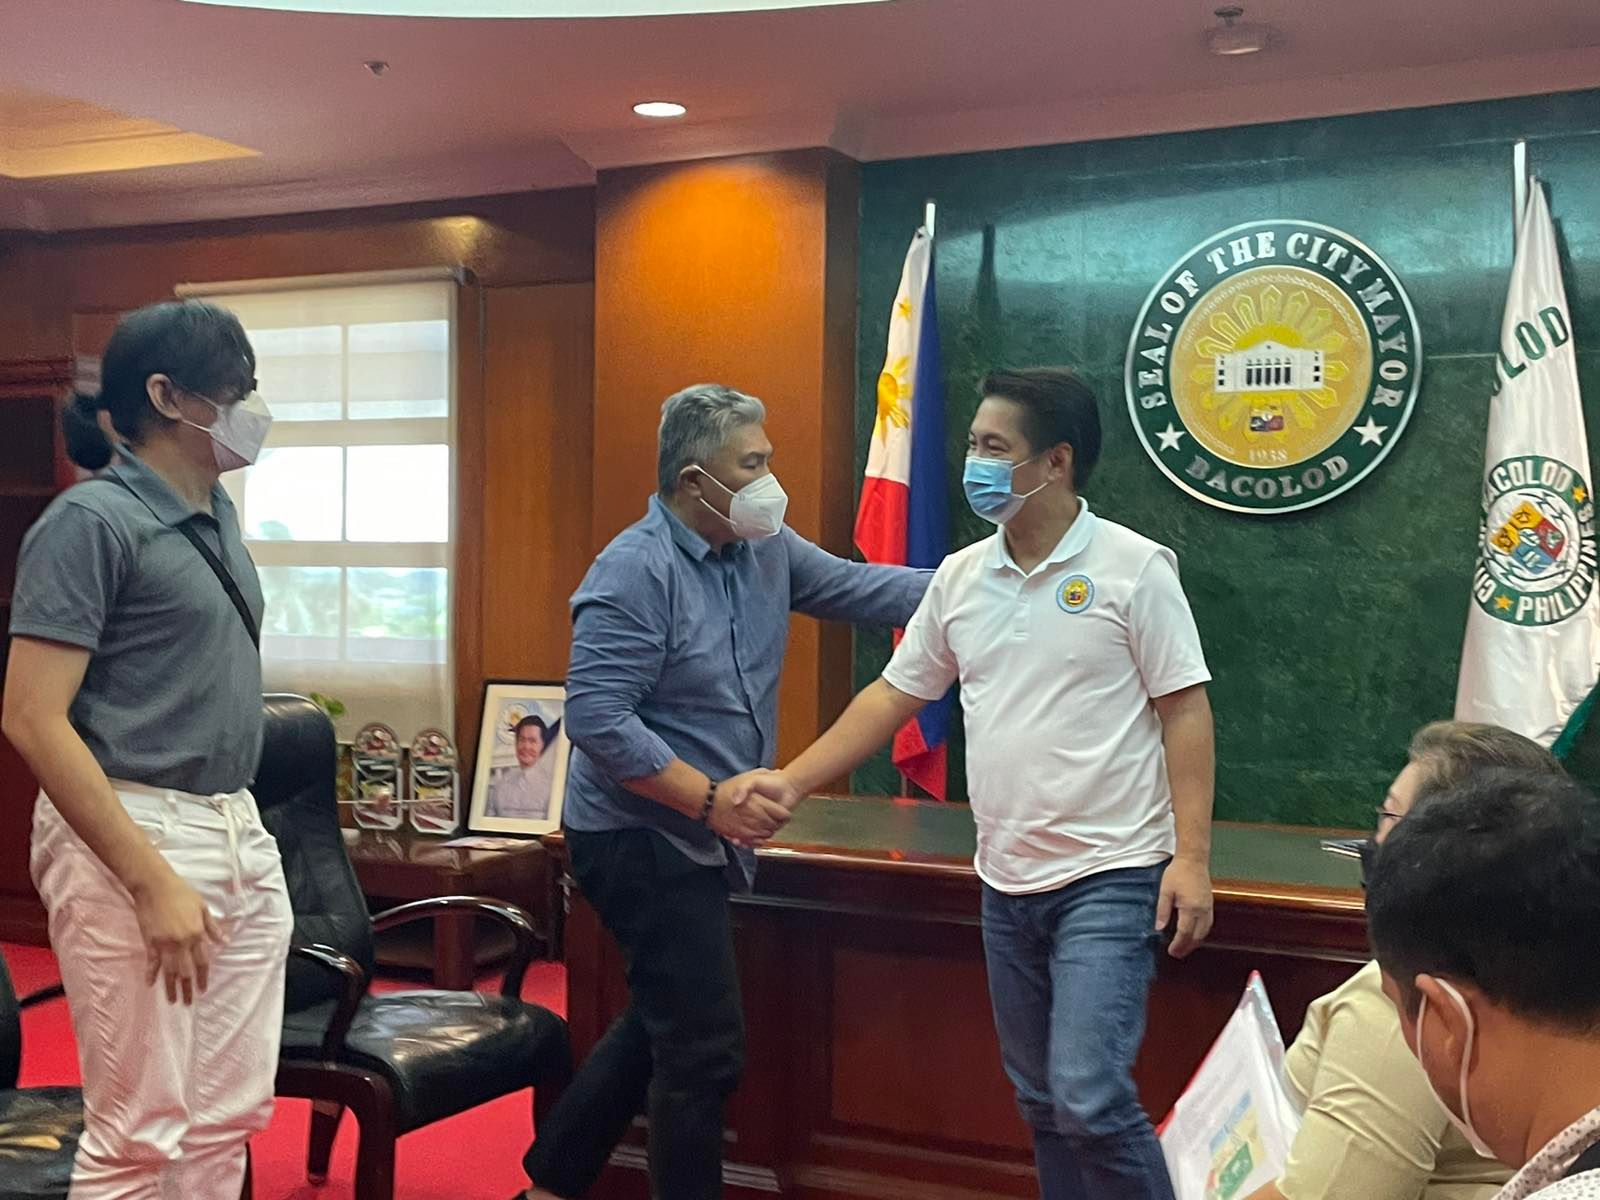 CLMMRH to be a specialty center for Bacolod – Mayor Albee Benitez